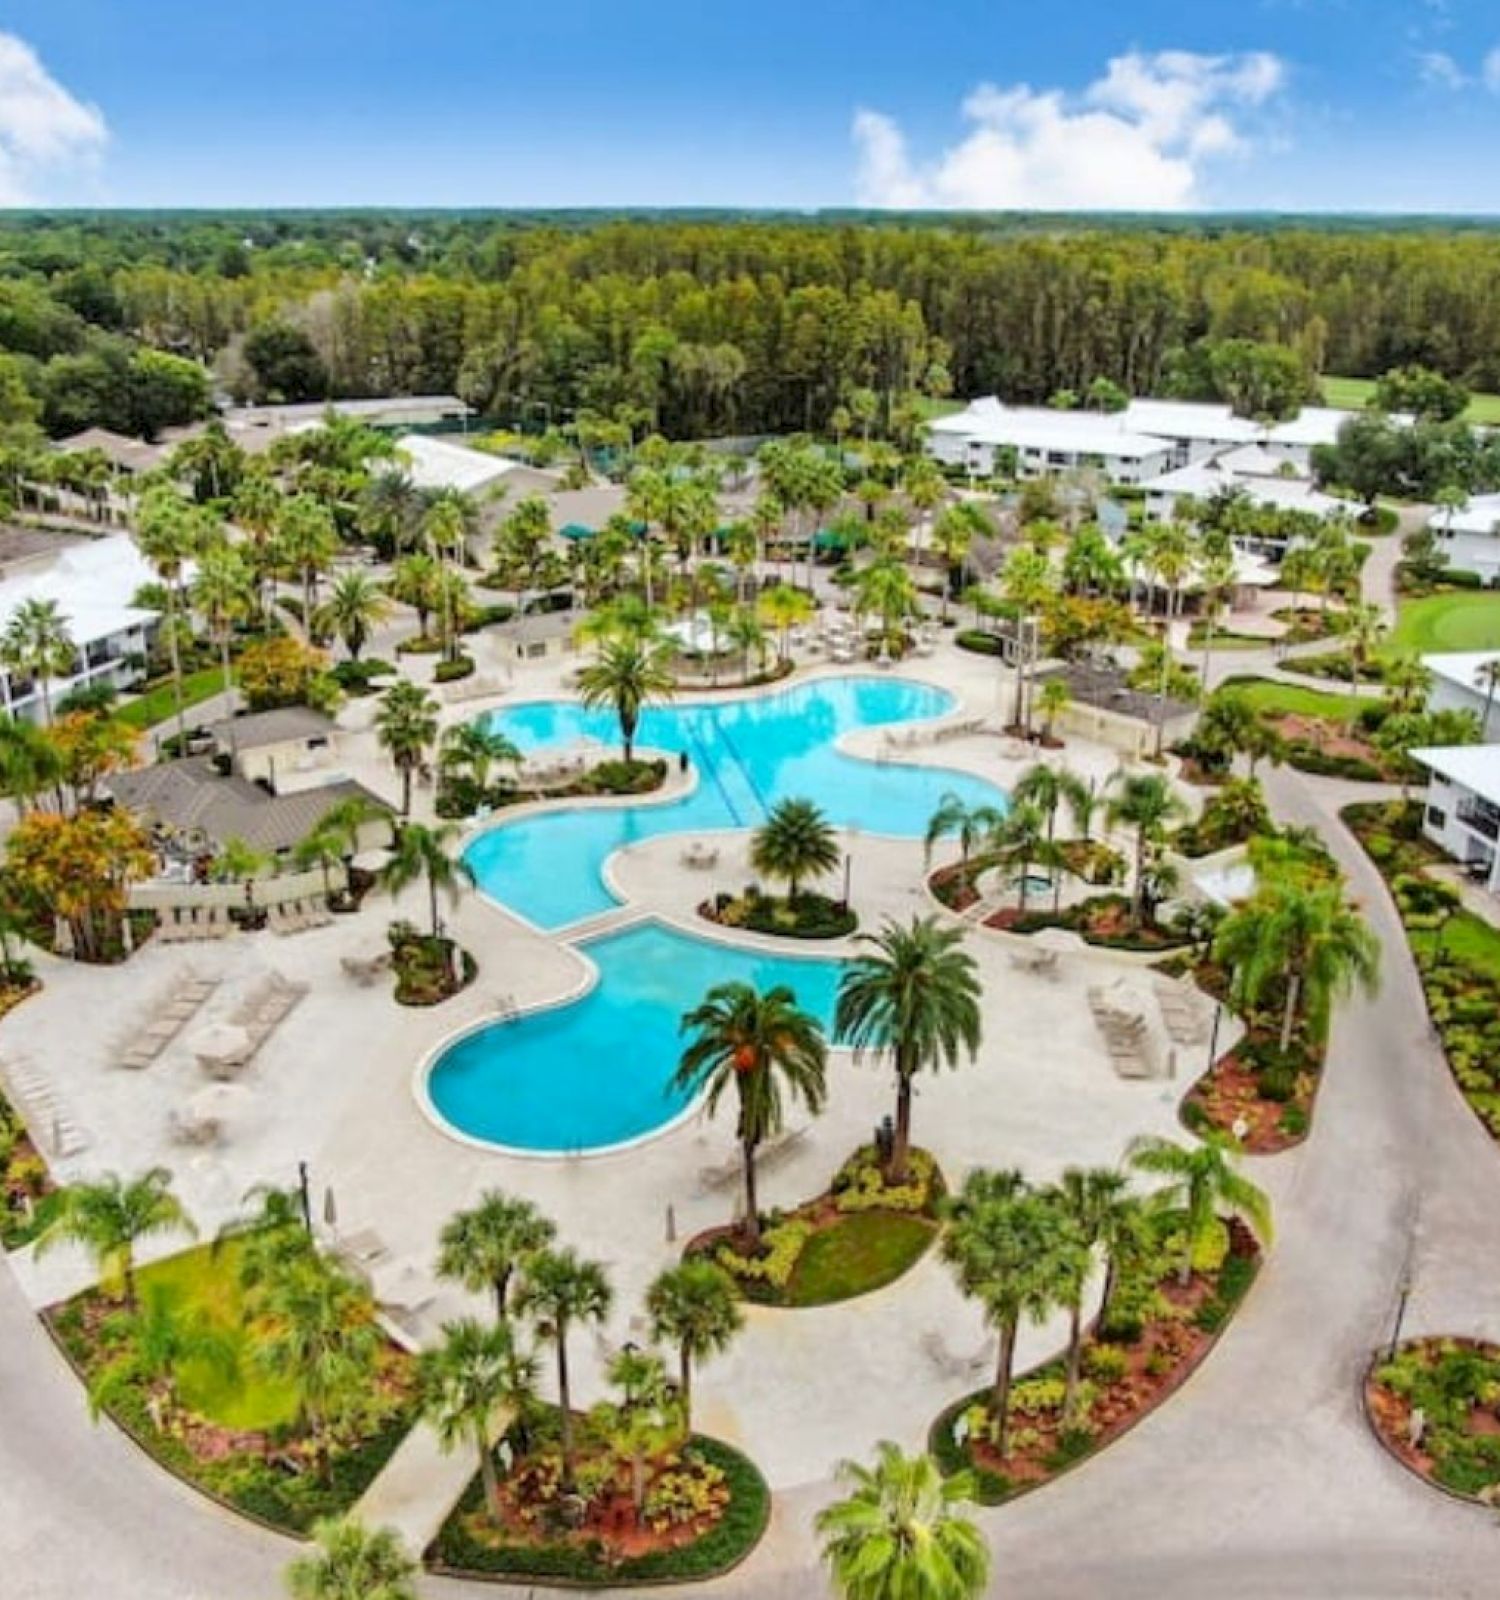 An aerial view of a resort with a large pool, surrounded by palm trees, pathways, and buildings, all set against a forested background.